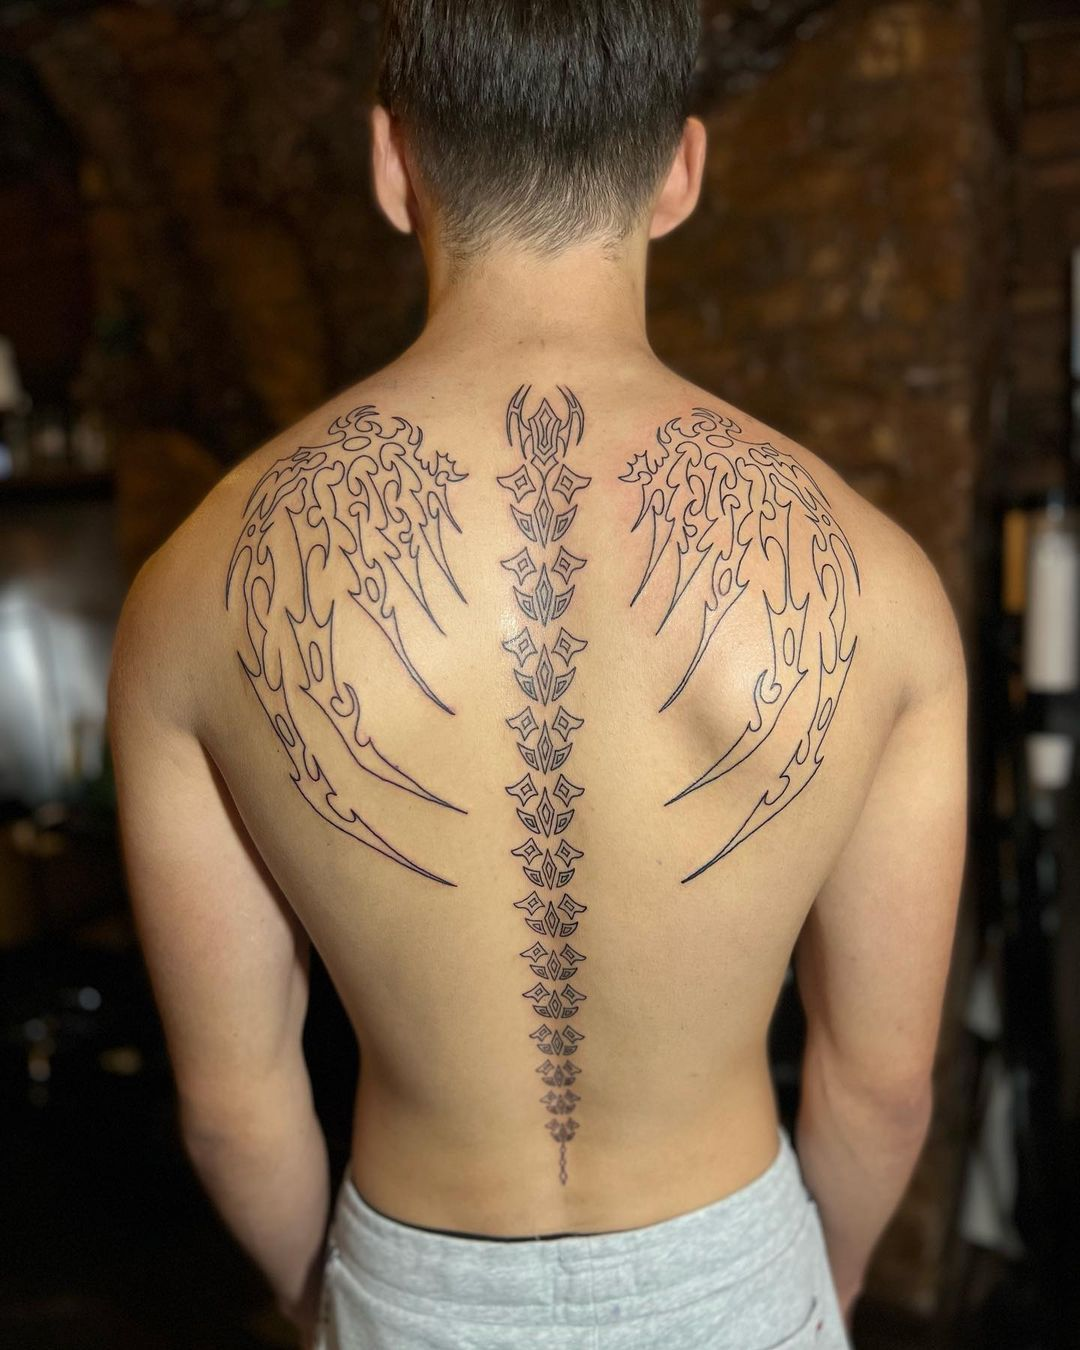 Top 73 Spine Tattoo Ideas For Guys 2021 Inspiration Guide  Spine tattoo  for men Back tattoos for guys Spine tattoos